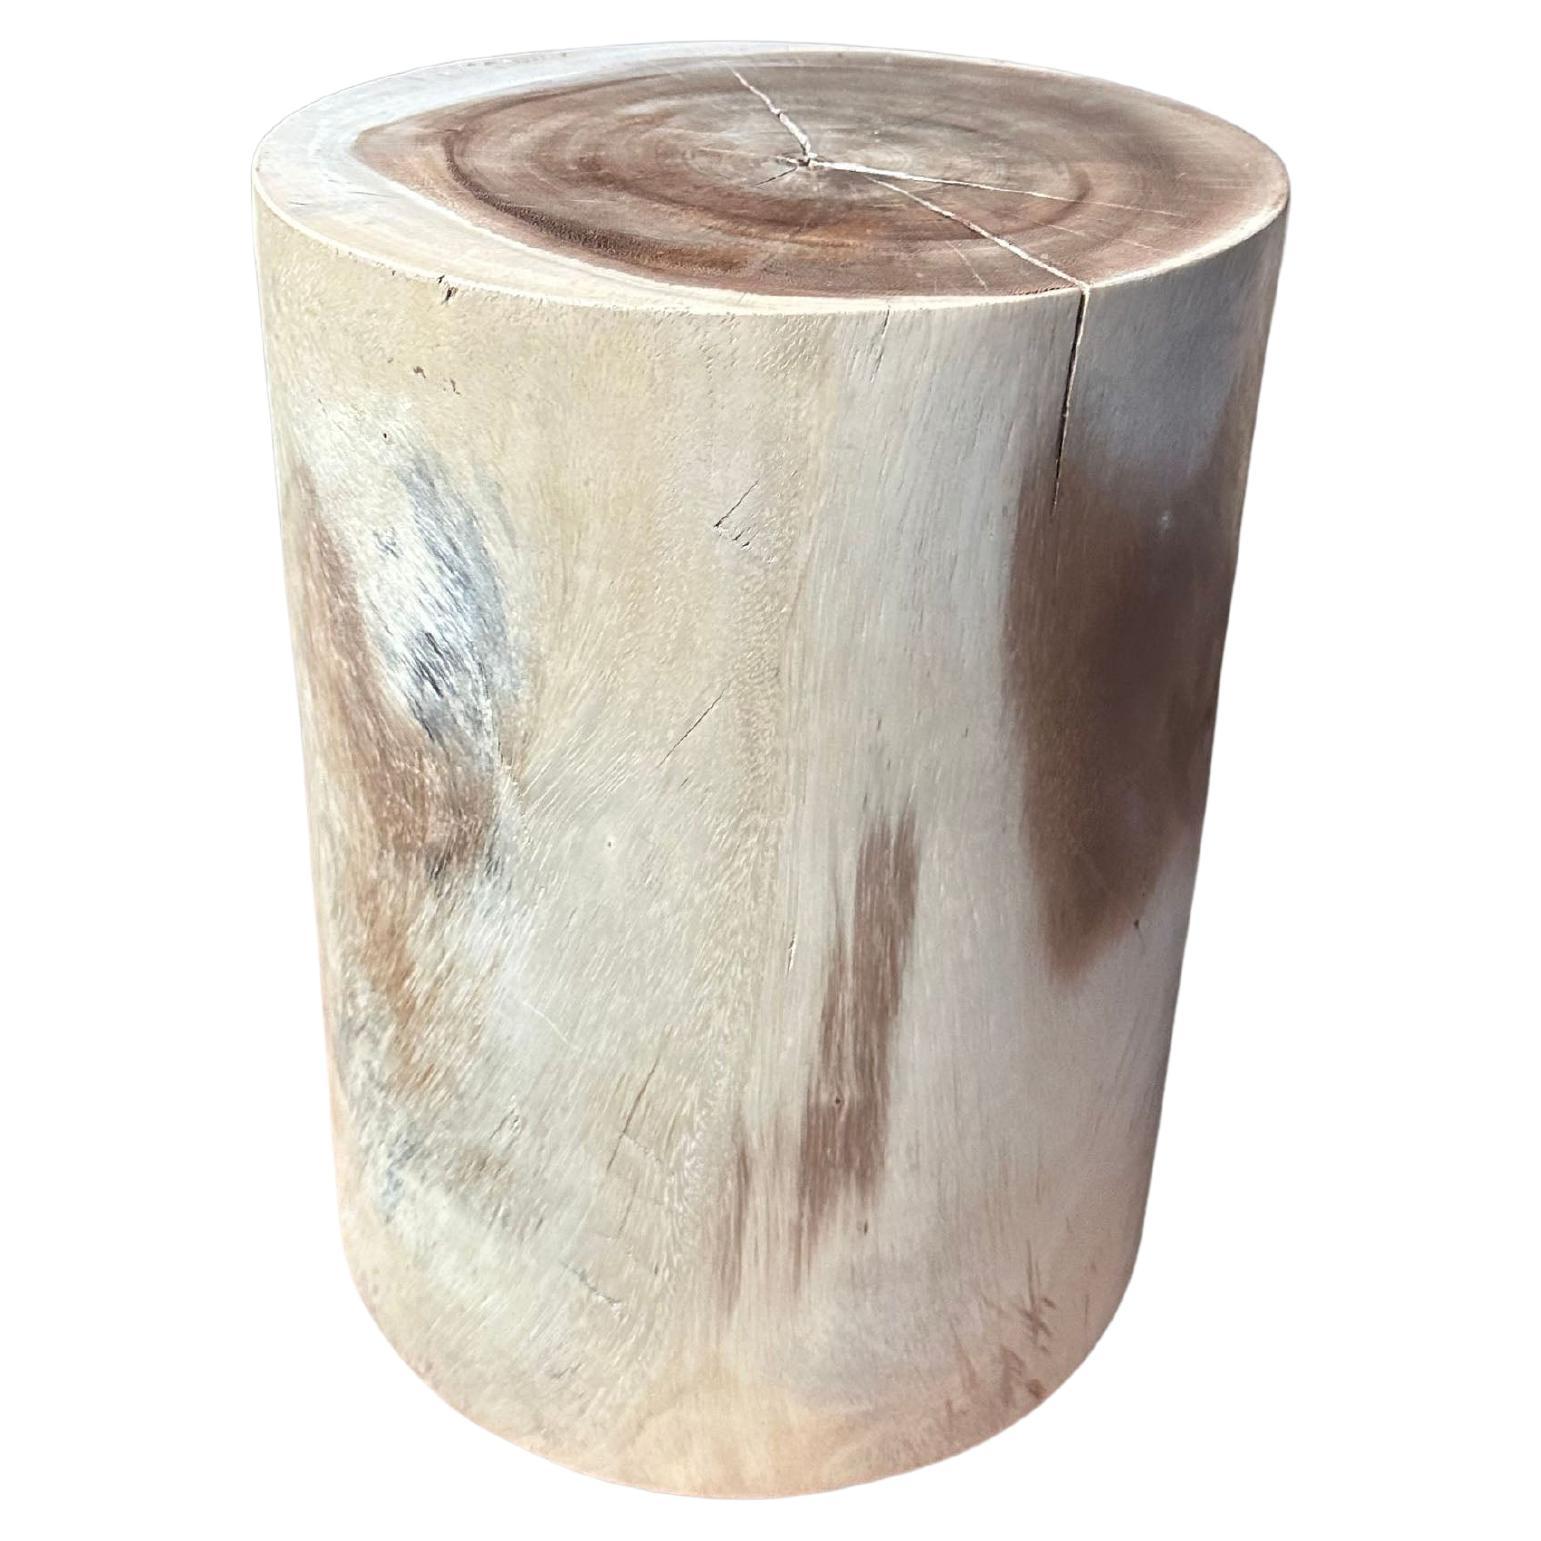 Sculptural Suar Wood Side Table, Hand-Crafted Modern Organic For Sale